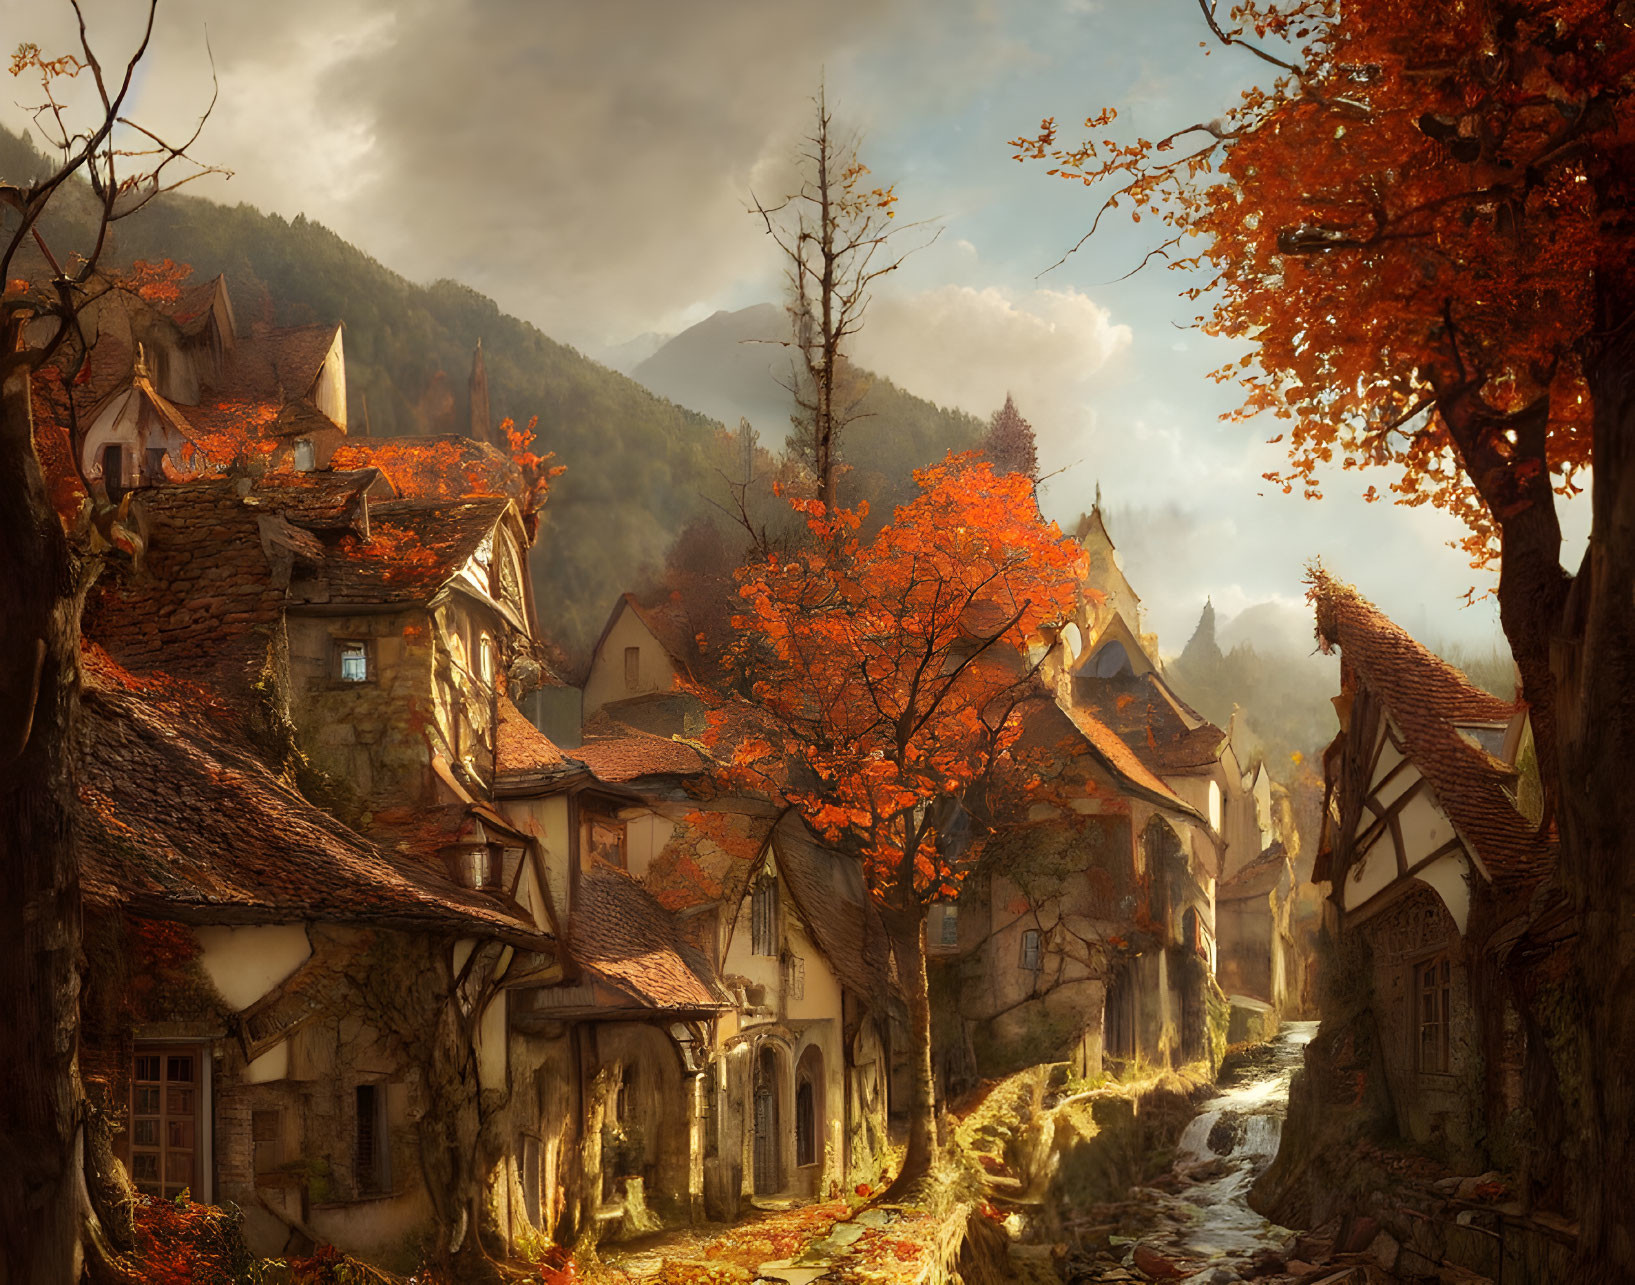 Serene forested mountain landscape with quaint medieval village in autumn colors